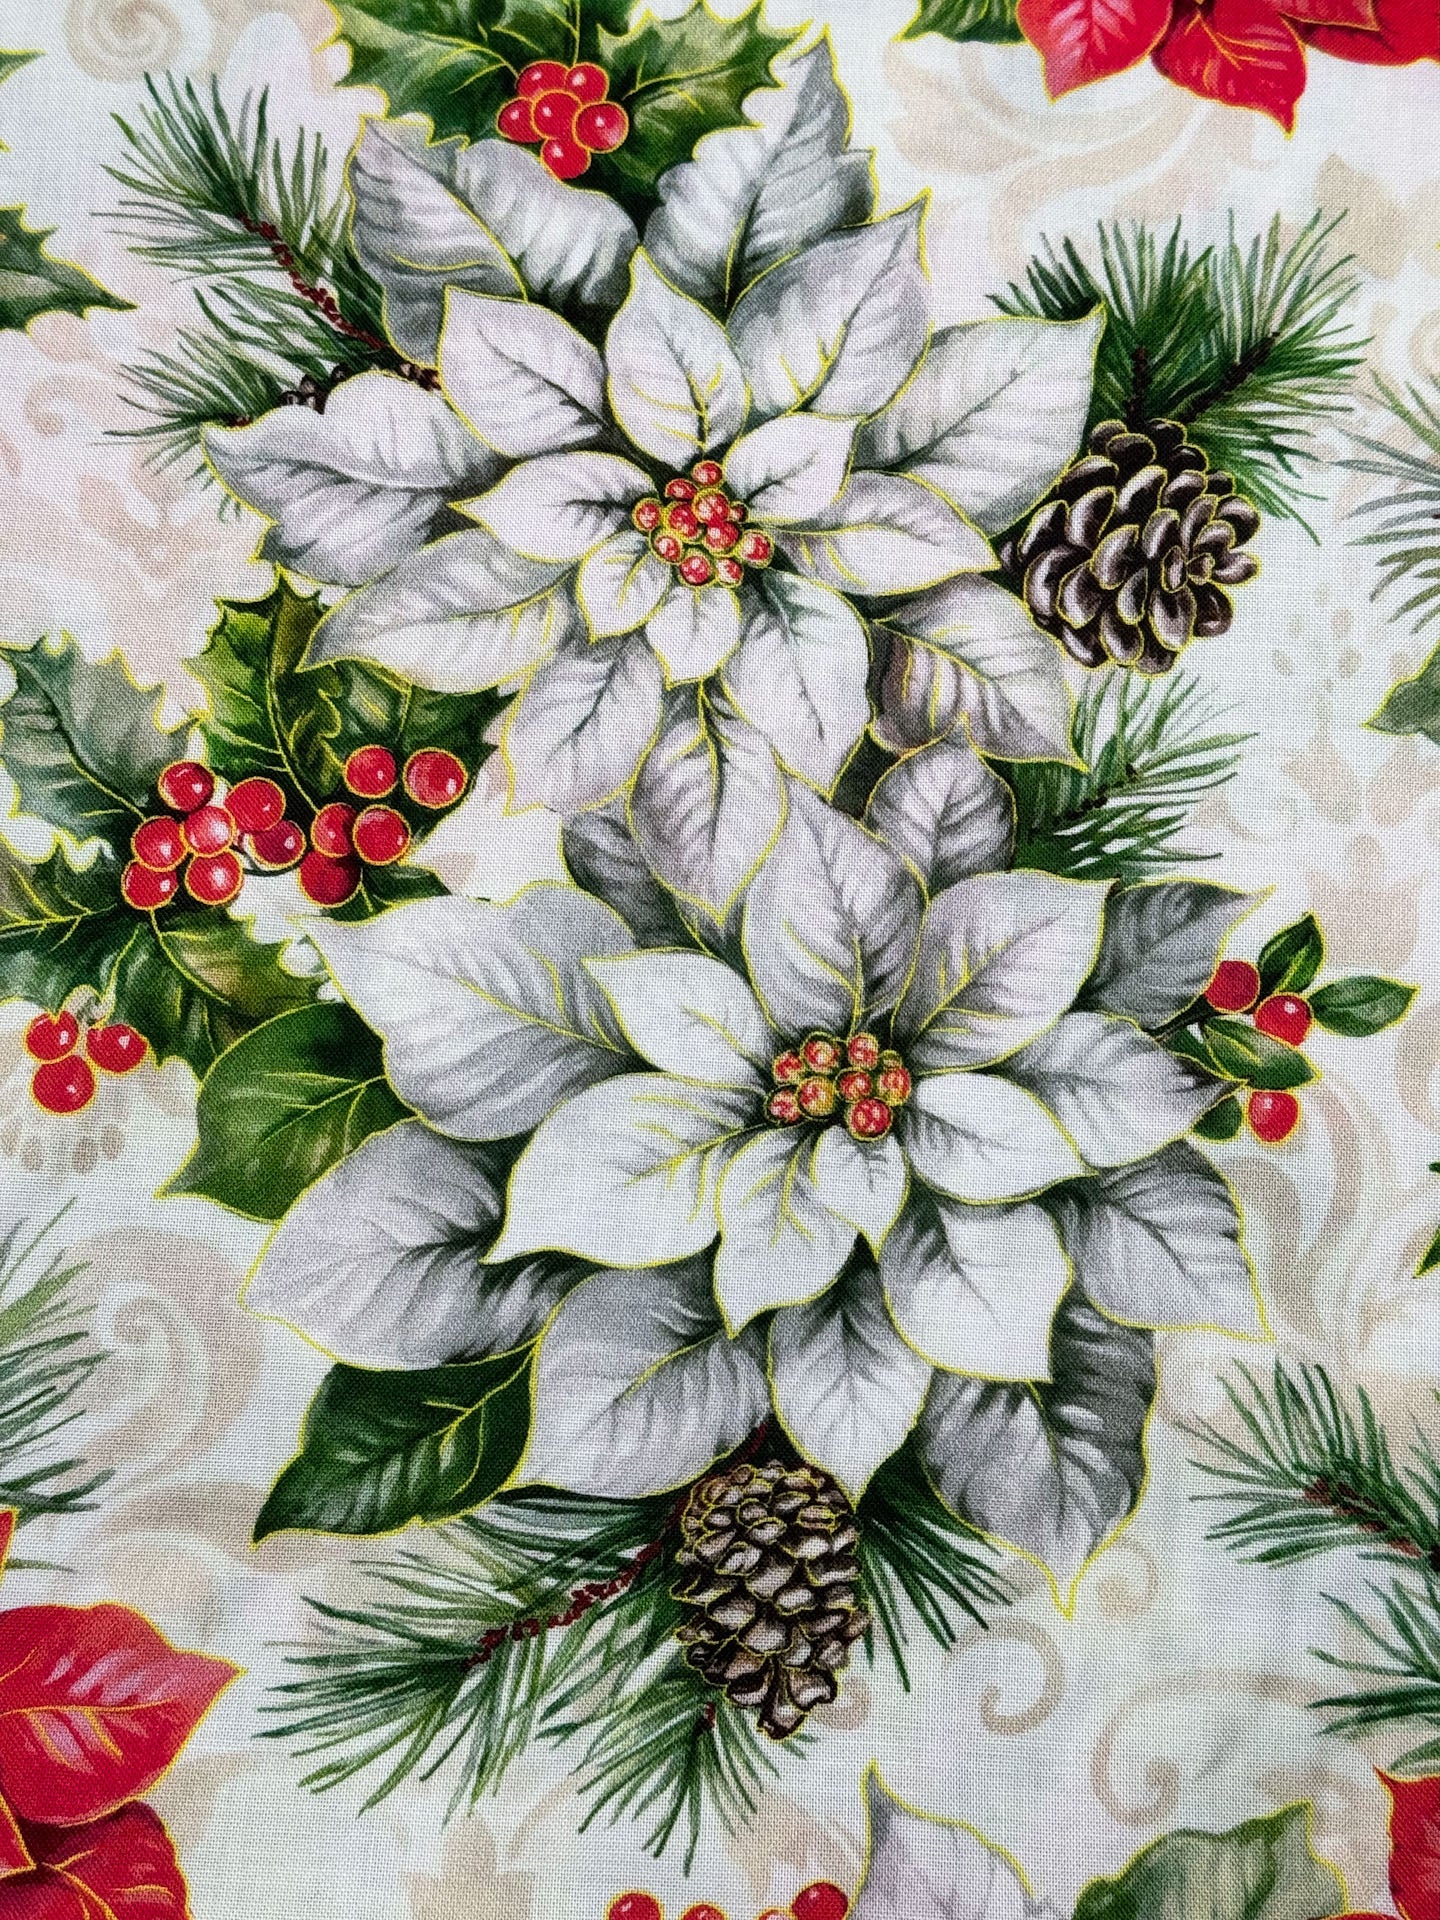 White and Red Poinsettia fabric by the yard Christmas